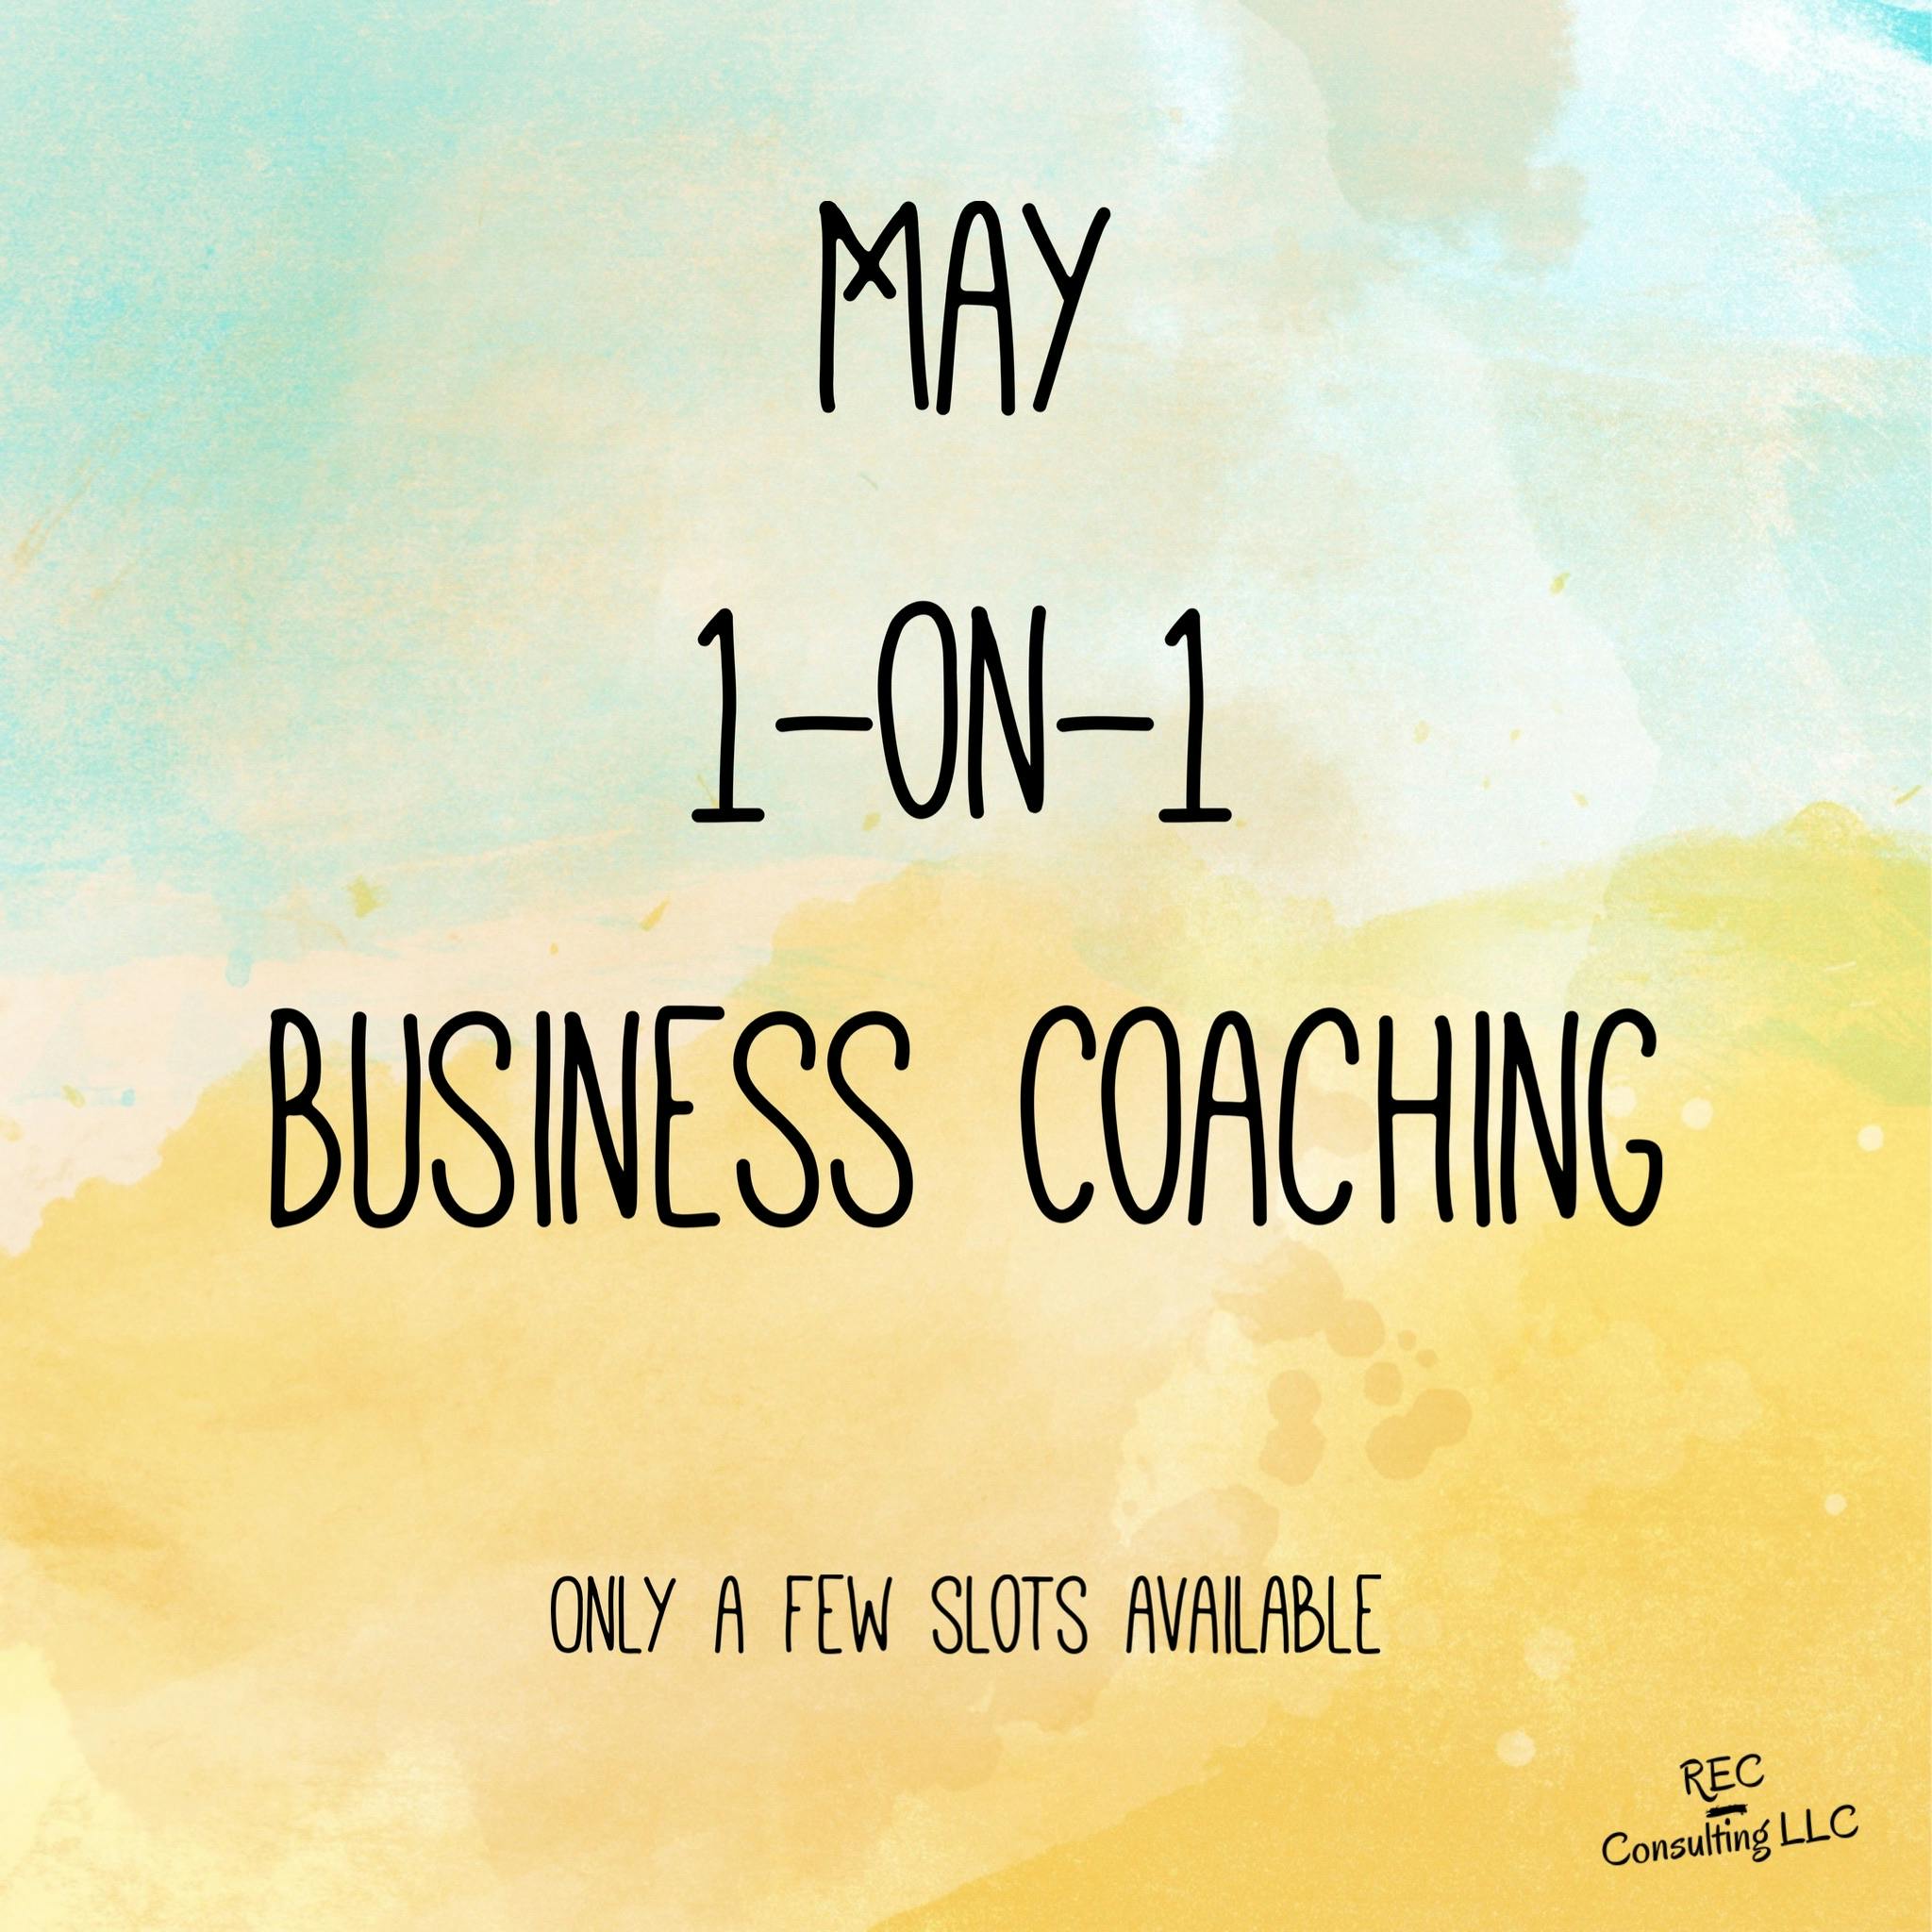 May 1-on-1 Business Coaching